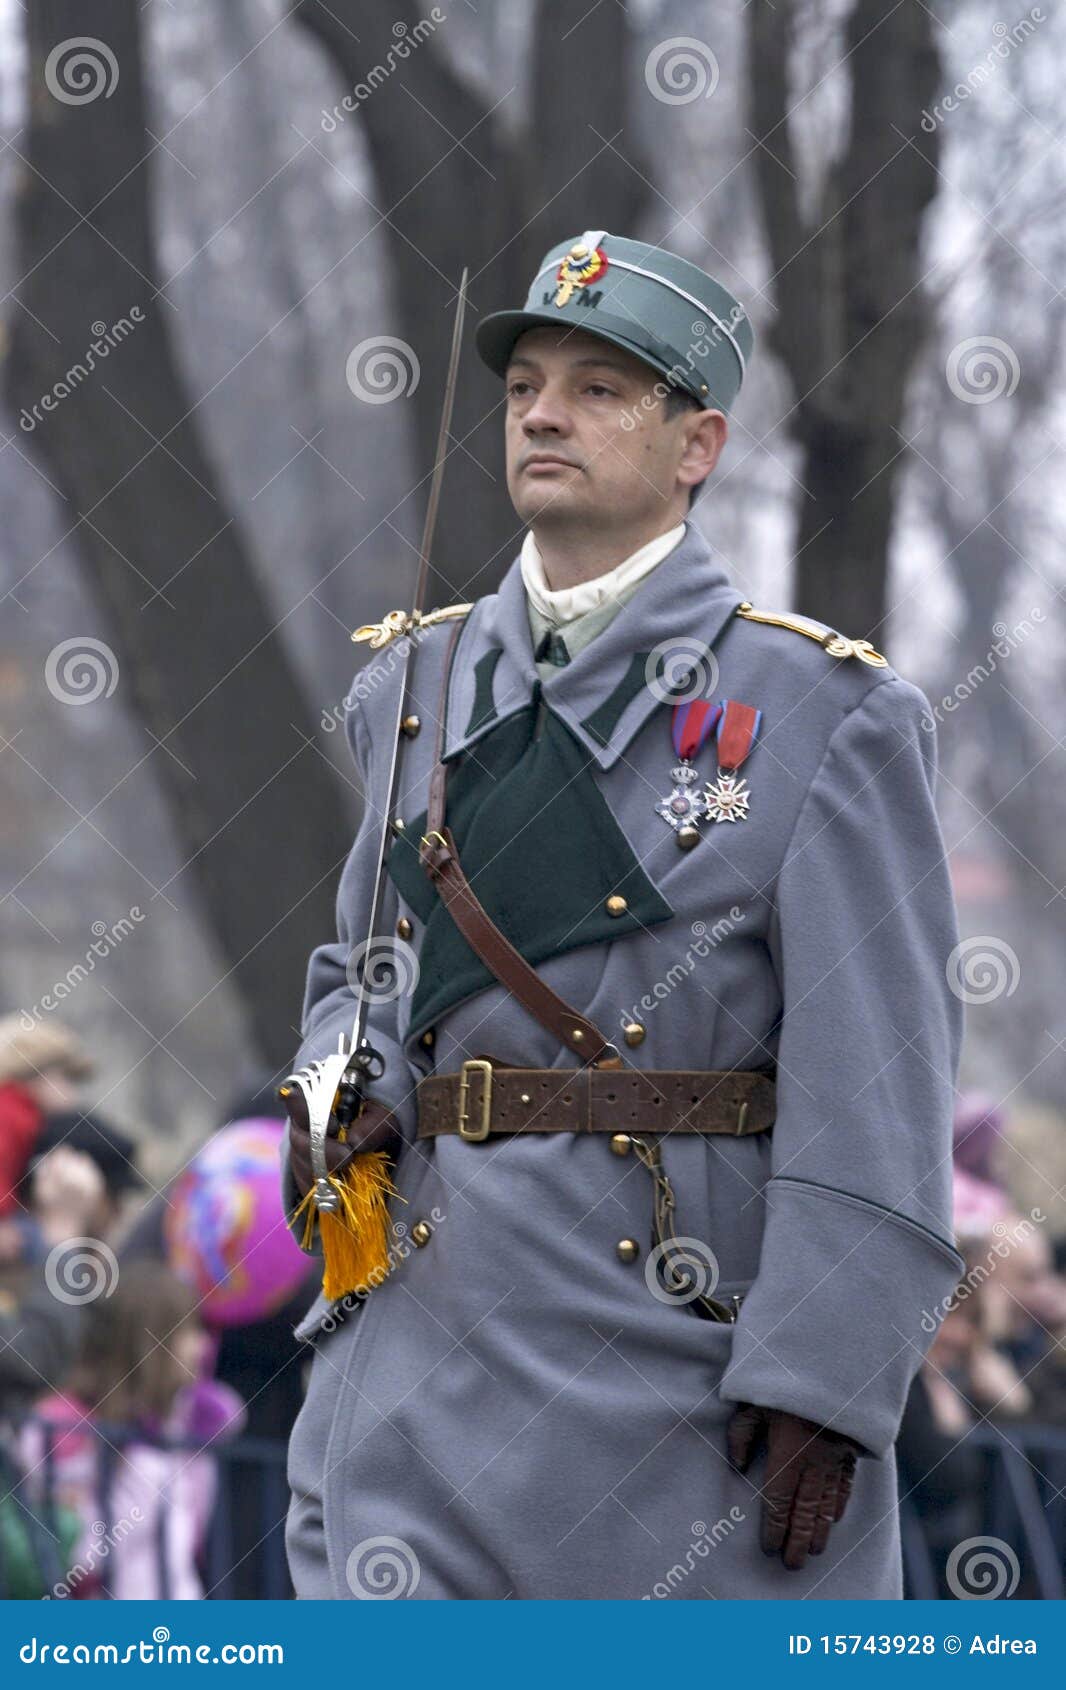 Commander of a Squad from the First World War Editorial Stock Photo